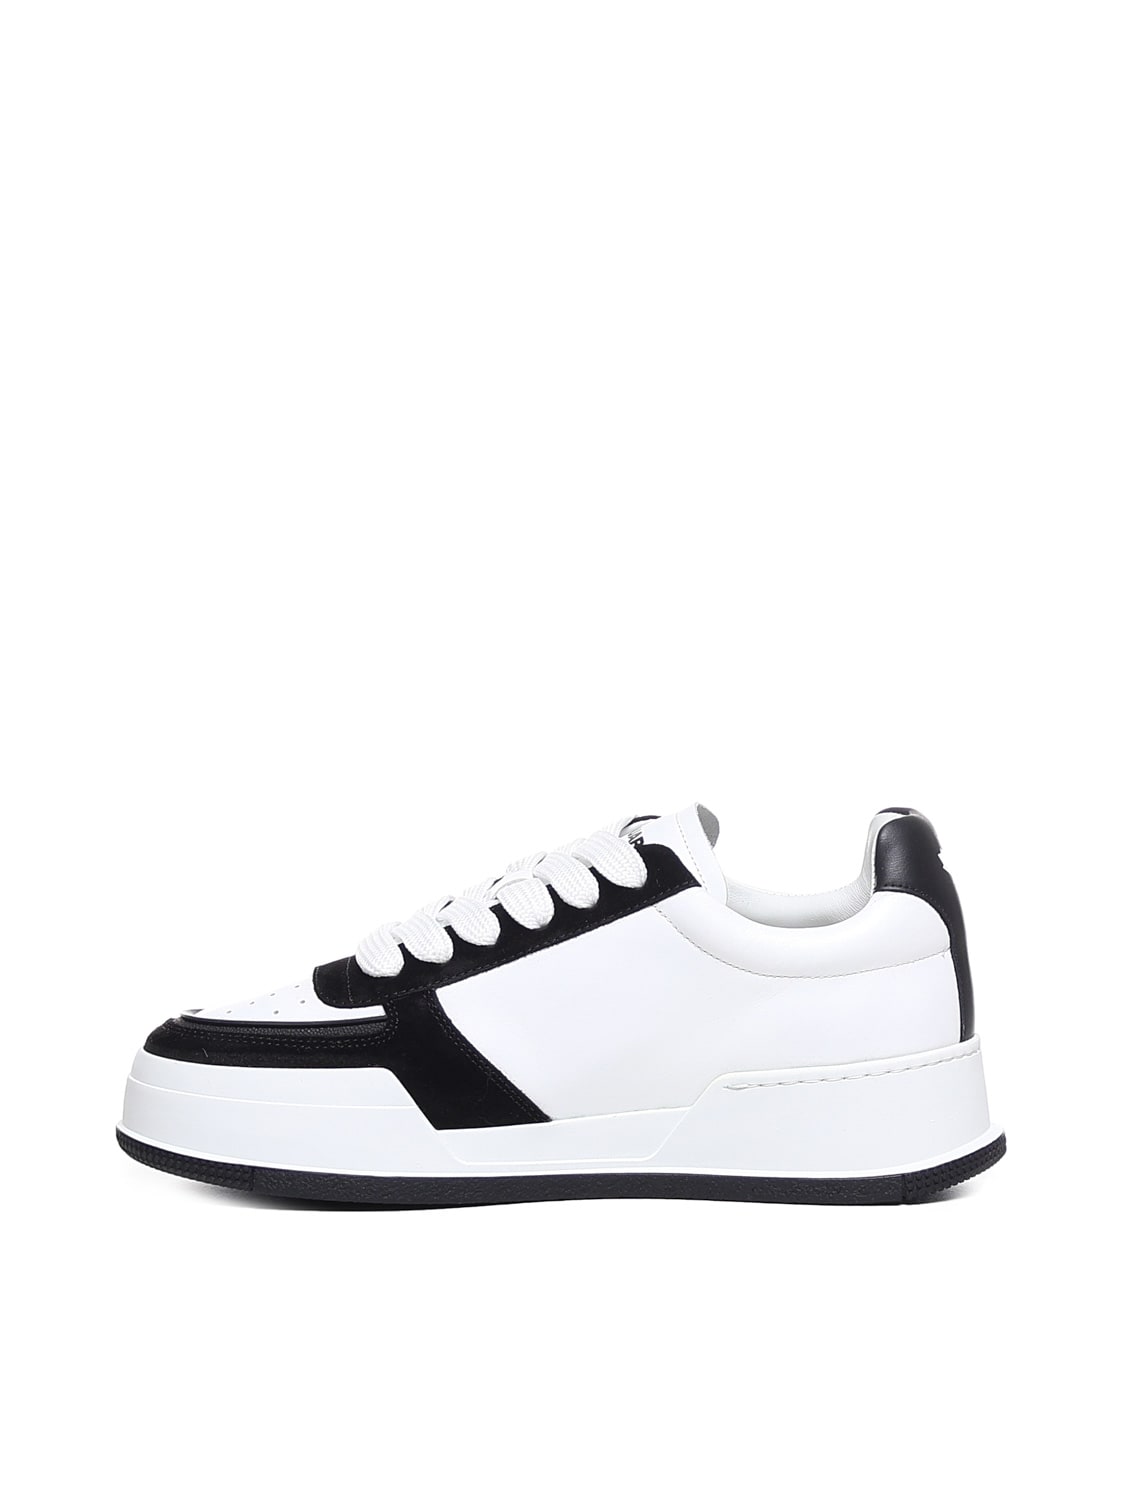 Shop Dsquared2 Canadian Sneakers In Black, White